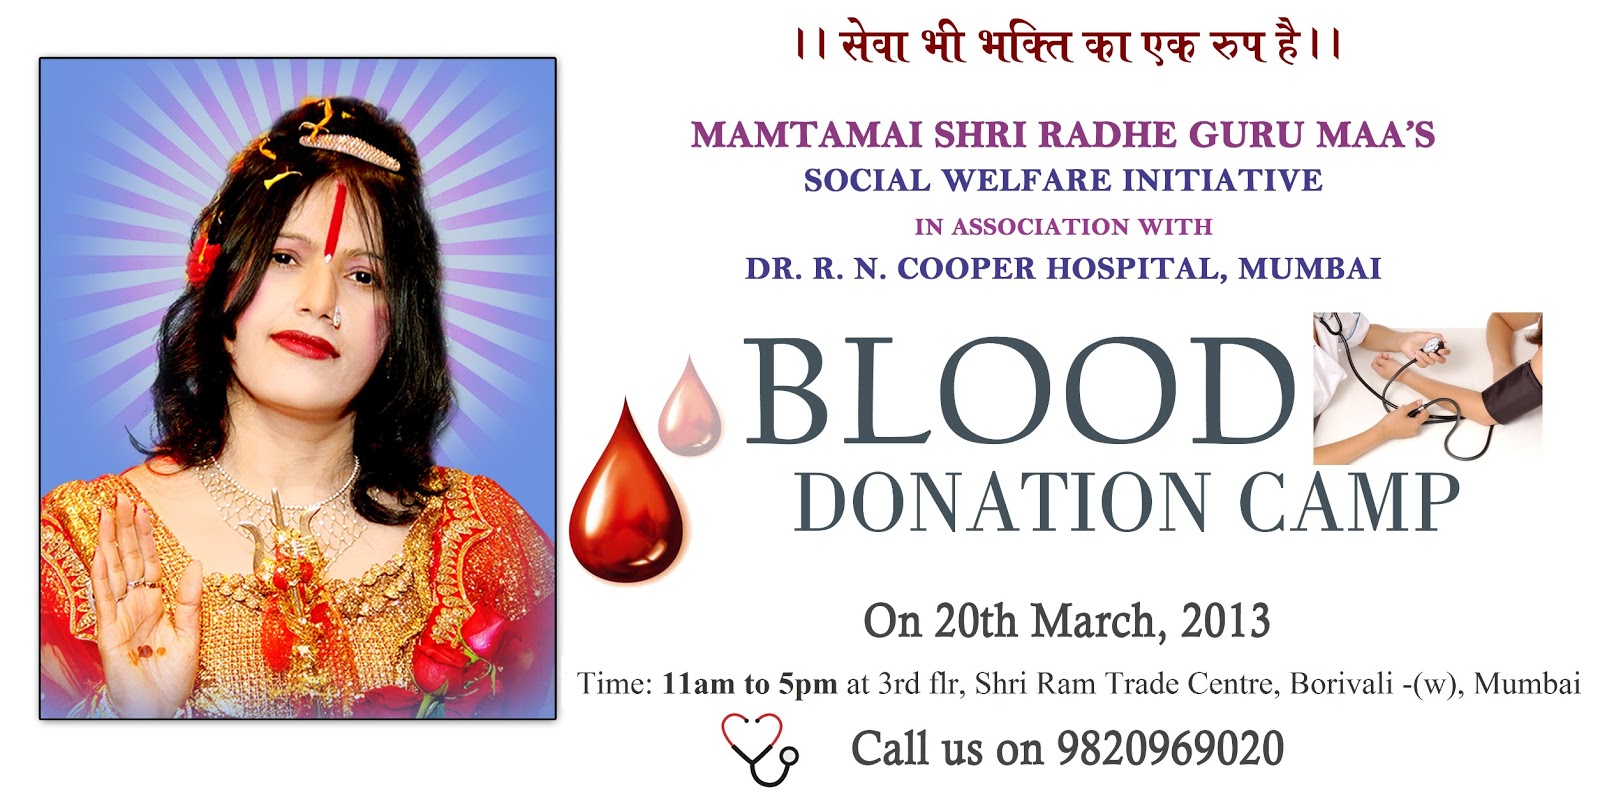 Essay on blood donation camp in hindi